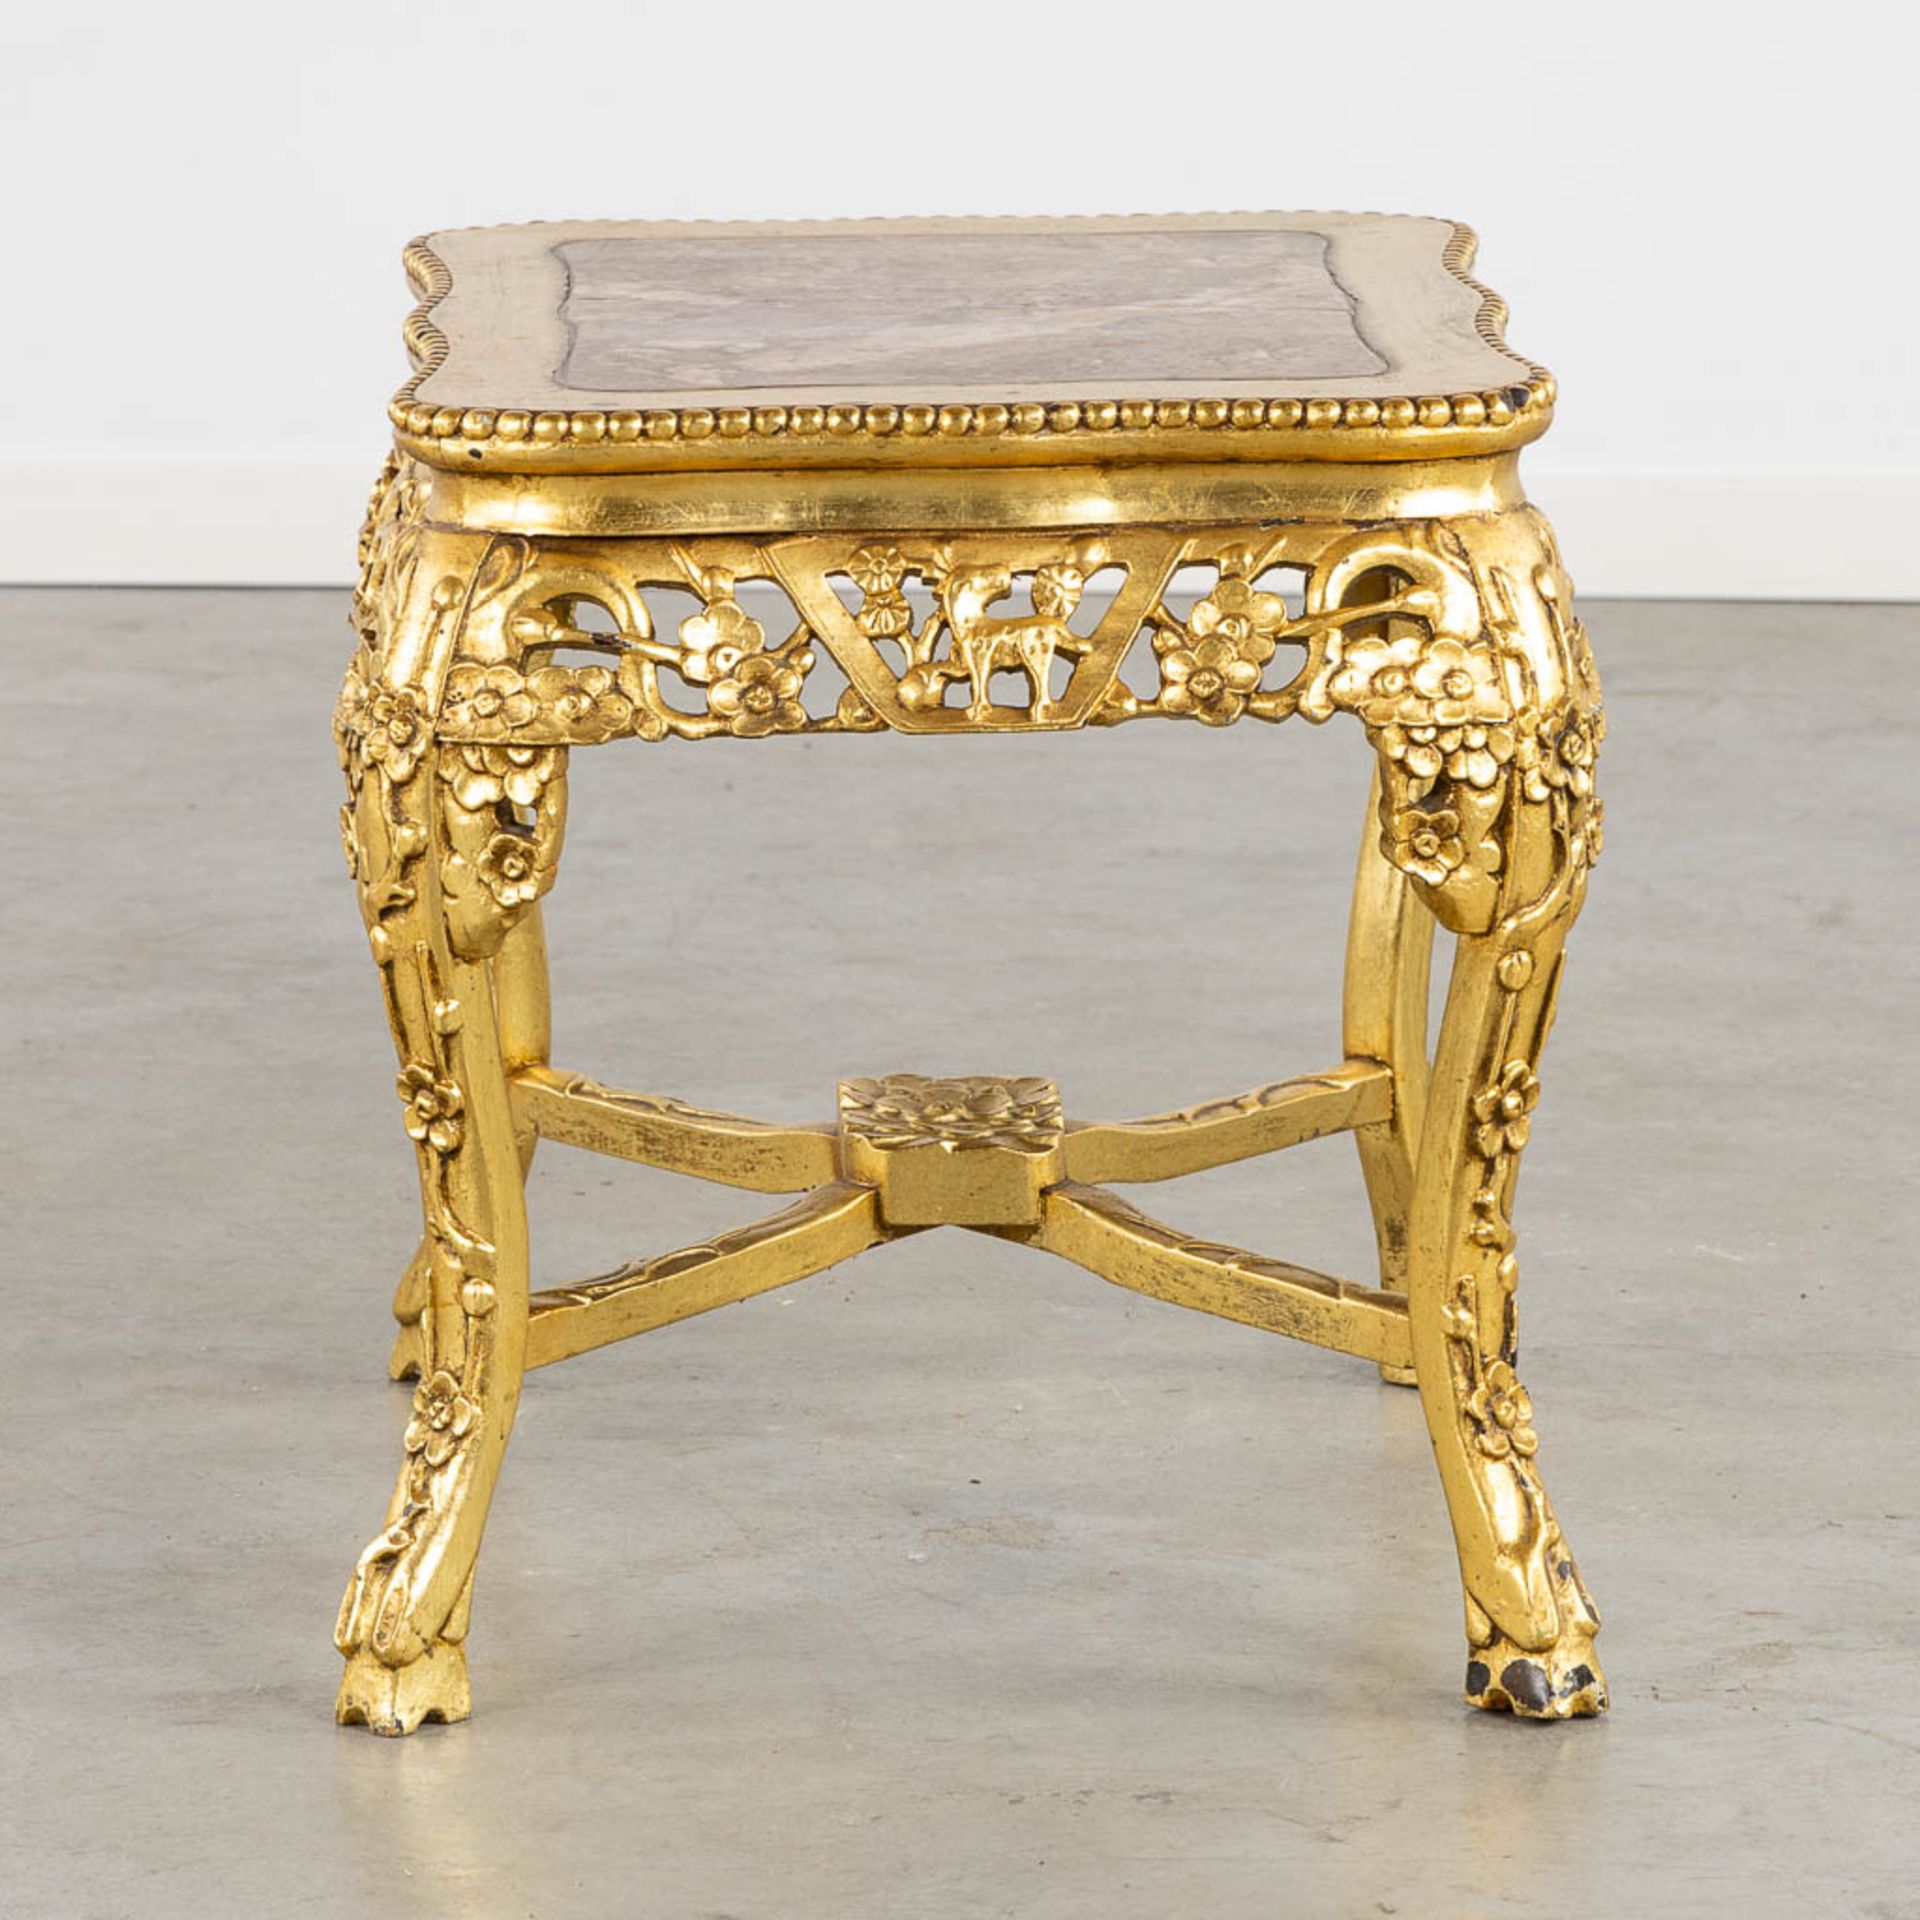 An oriental style side table, gilt wood with a marble top. (L:46 x W:52 x H:48 cm) - Bild 6 aus 12